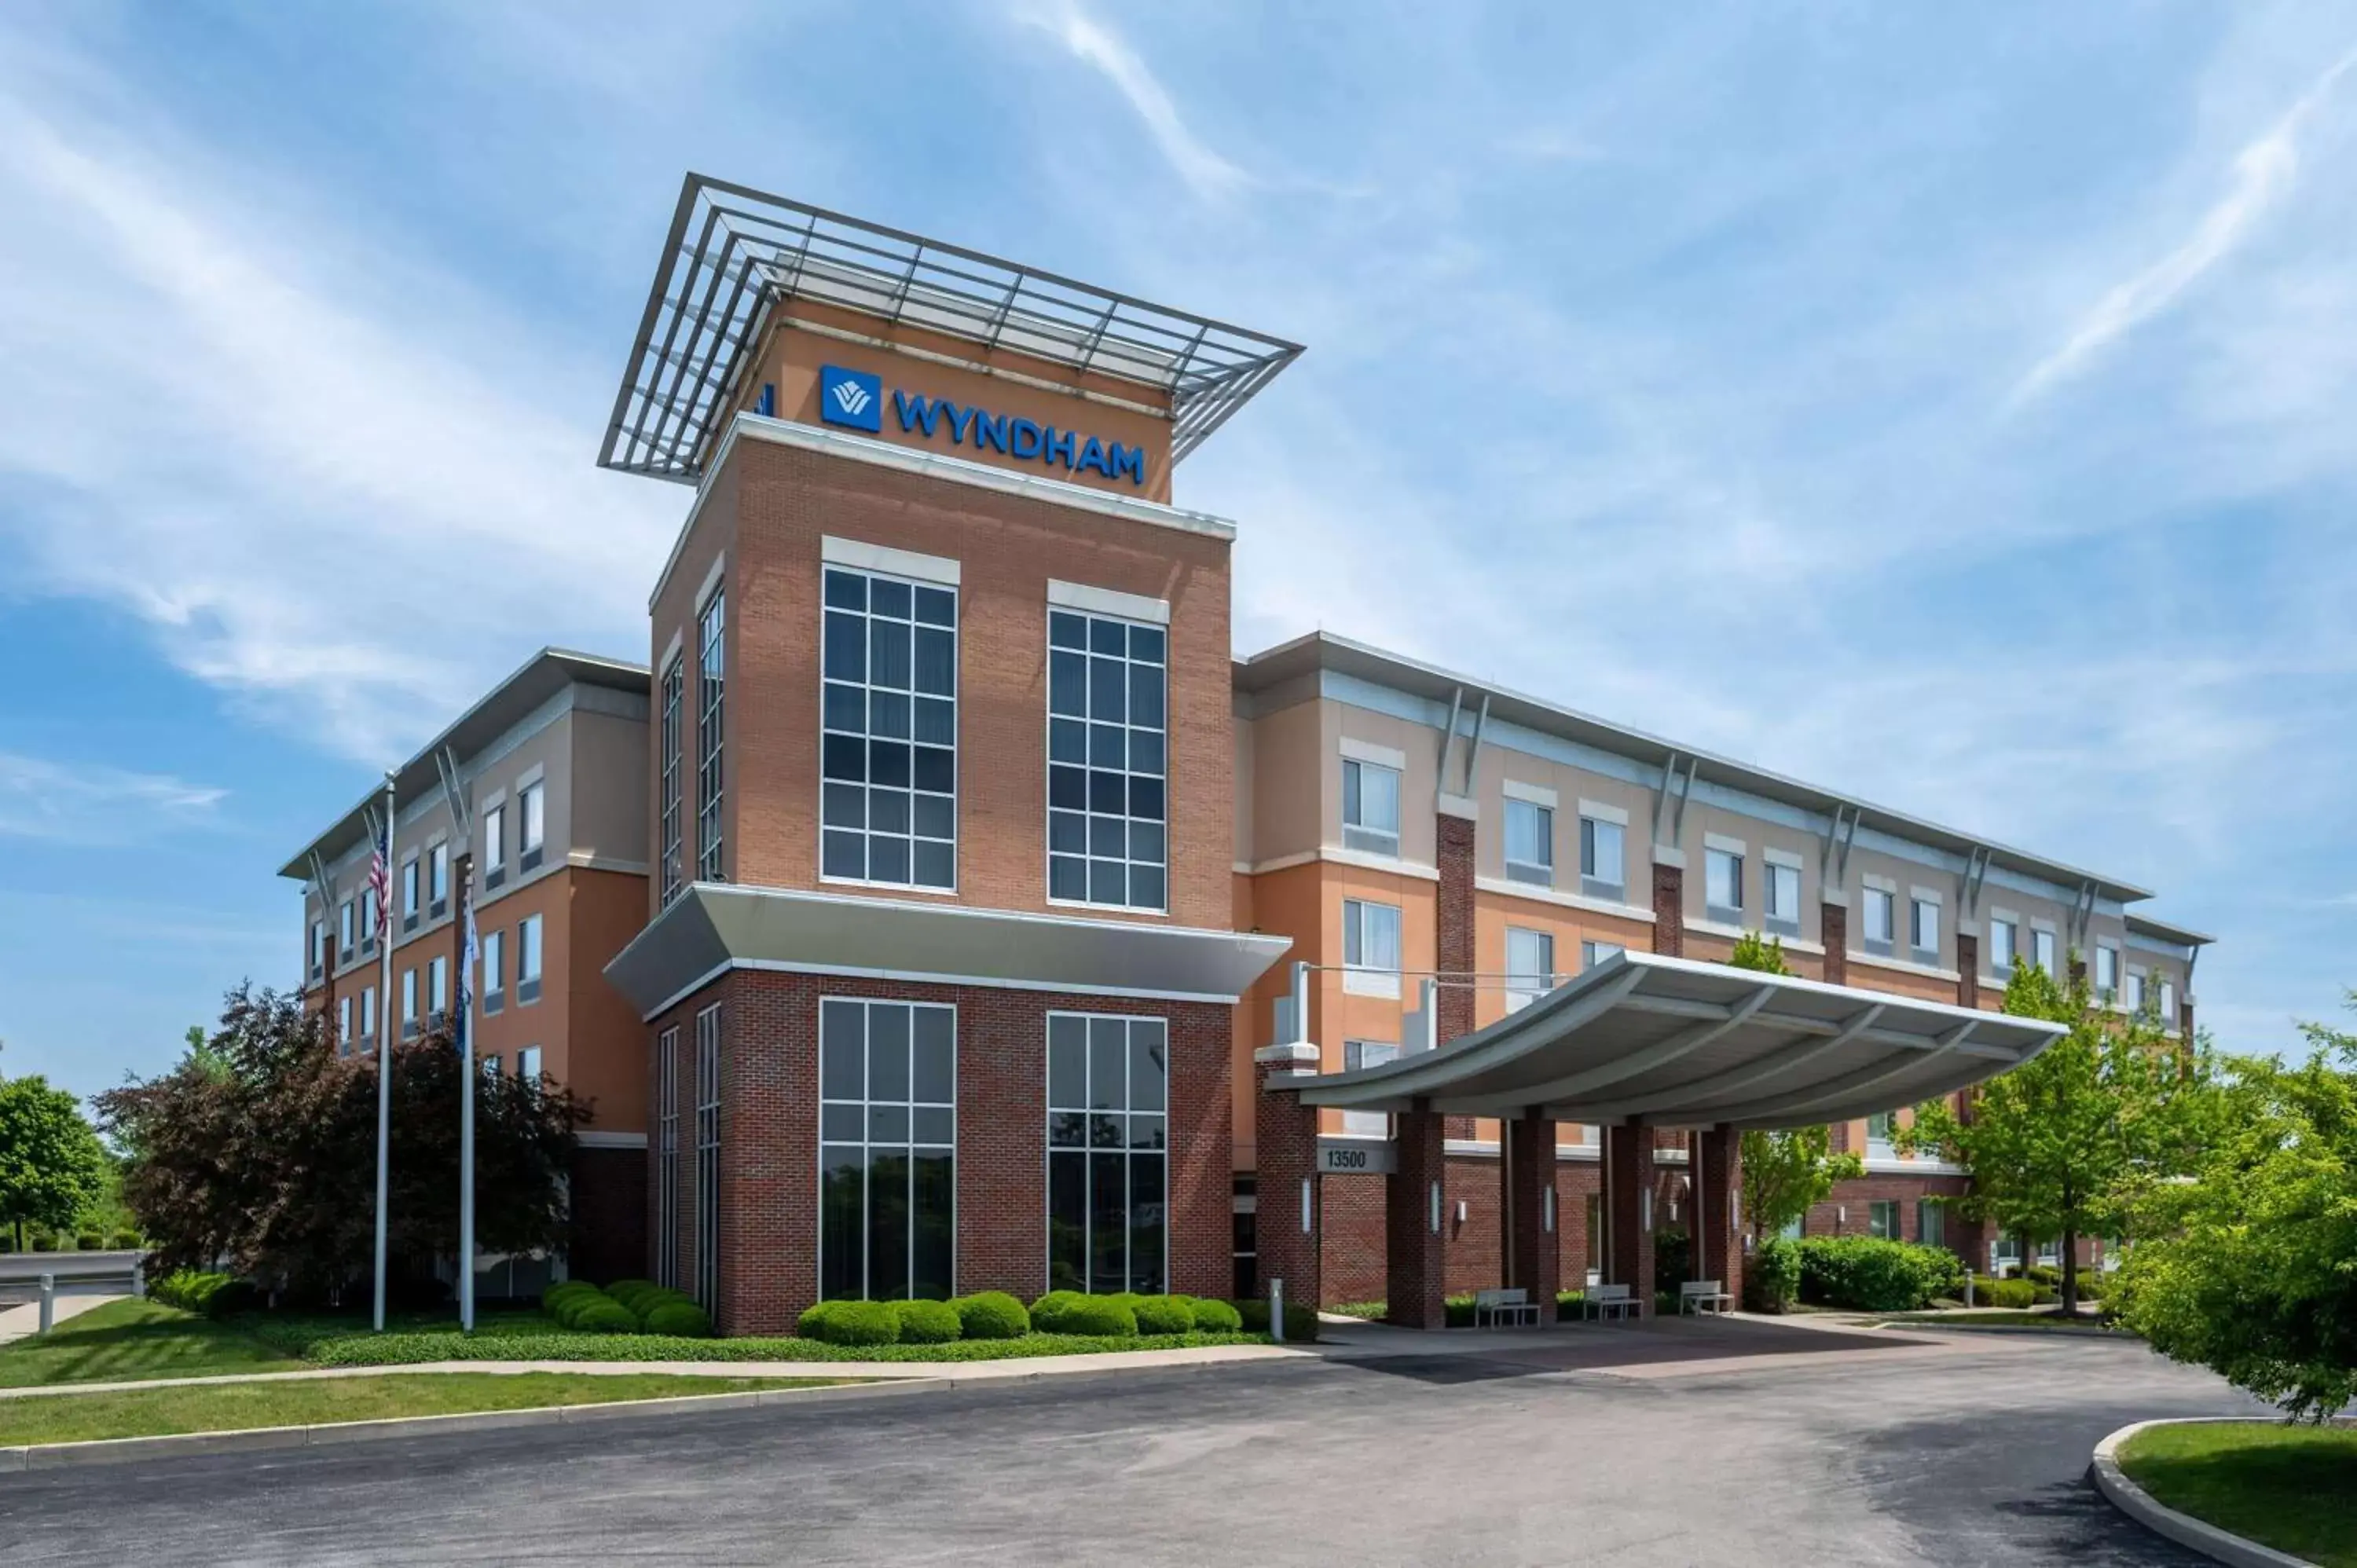 Property Building in Wyndham Noblesville